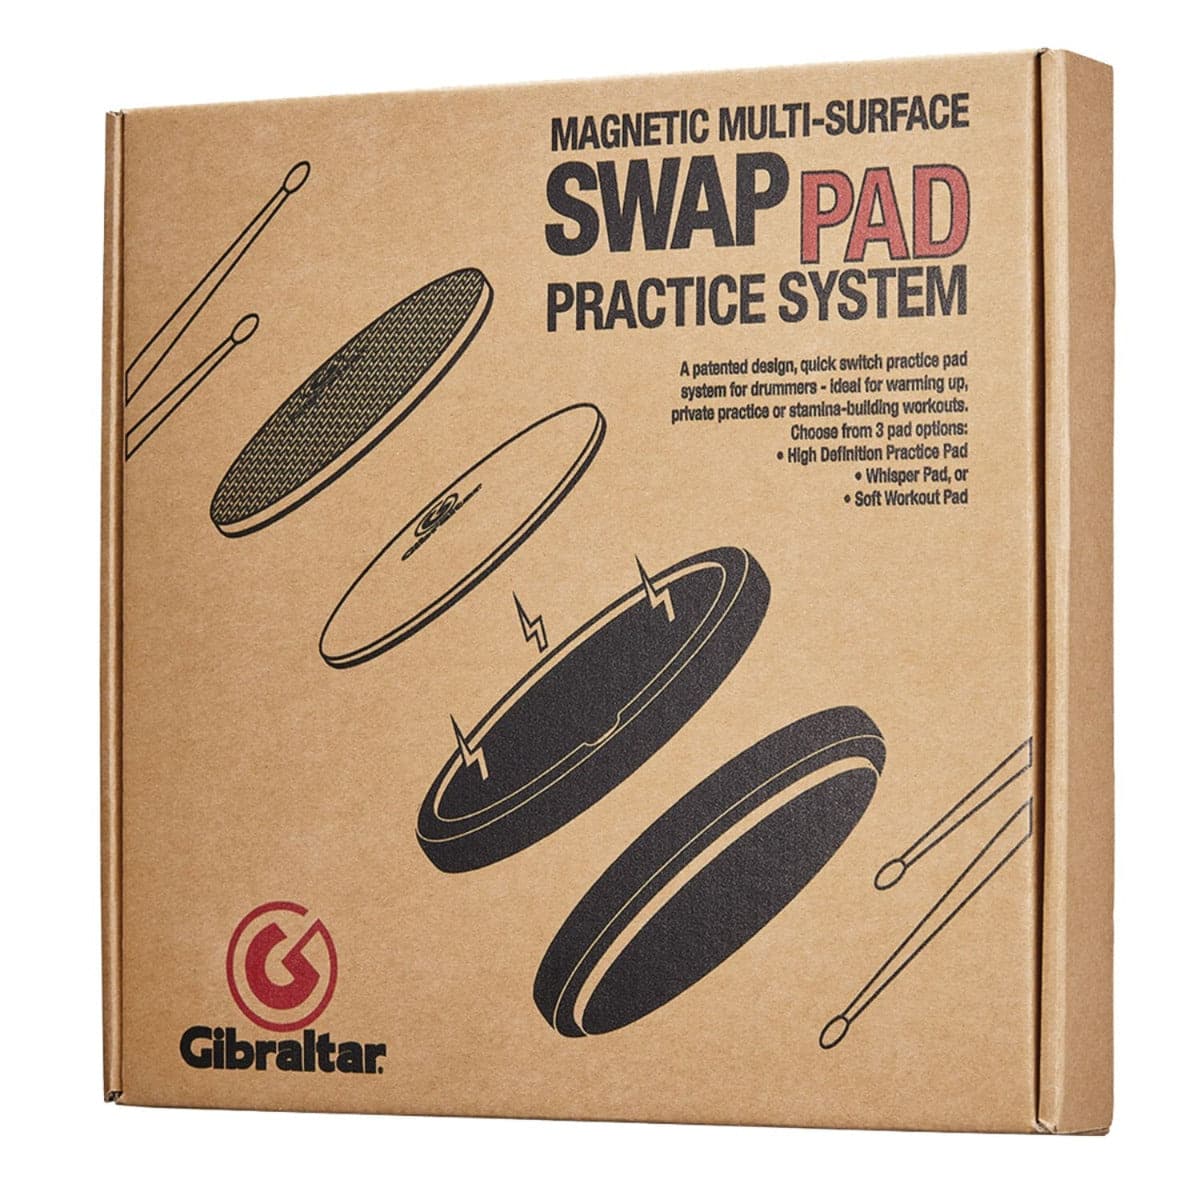 Gibraltar Magentic Multi-Surface Swap Pad Practice System